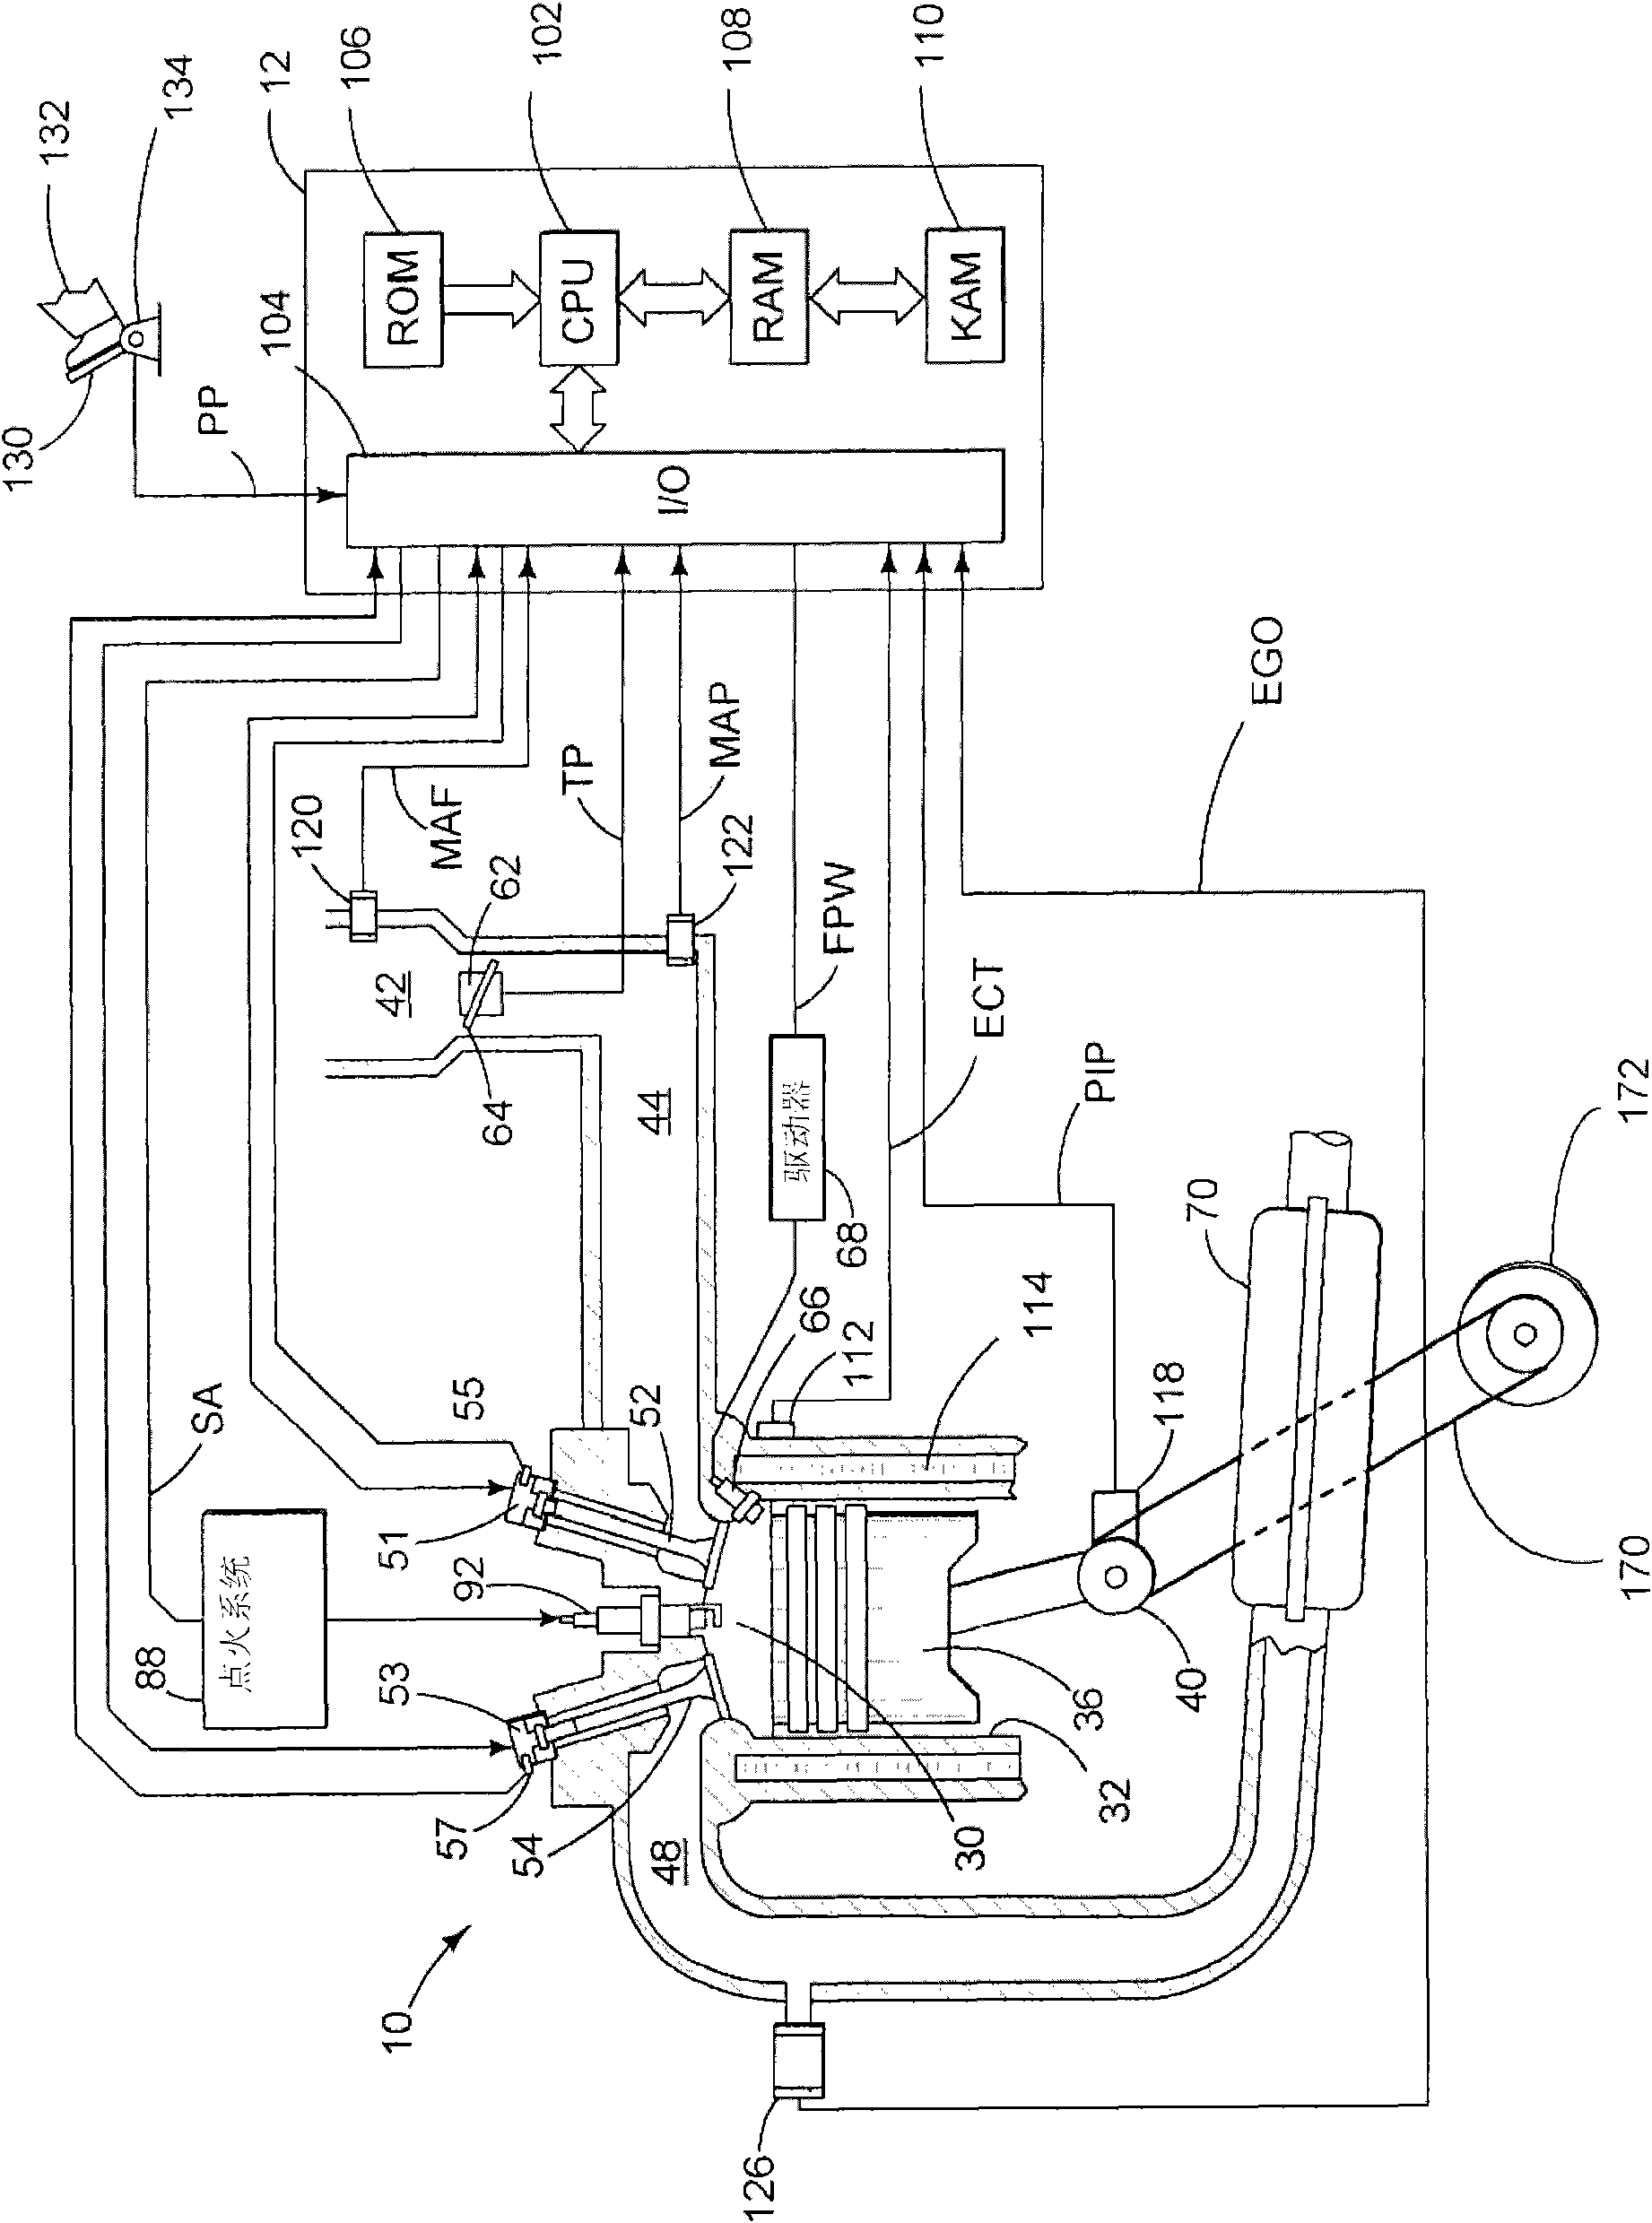 Methods and systems for controlling engine shutdown in a vehicle